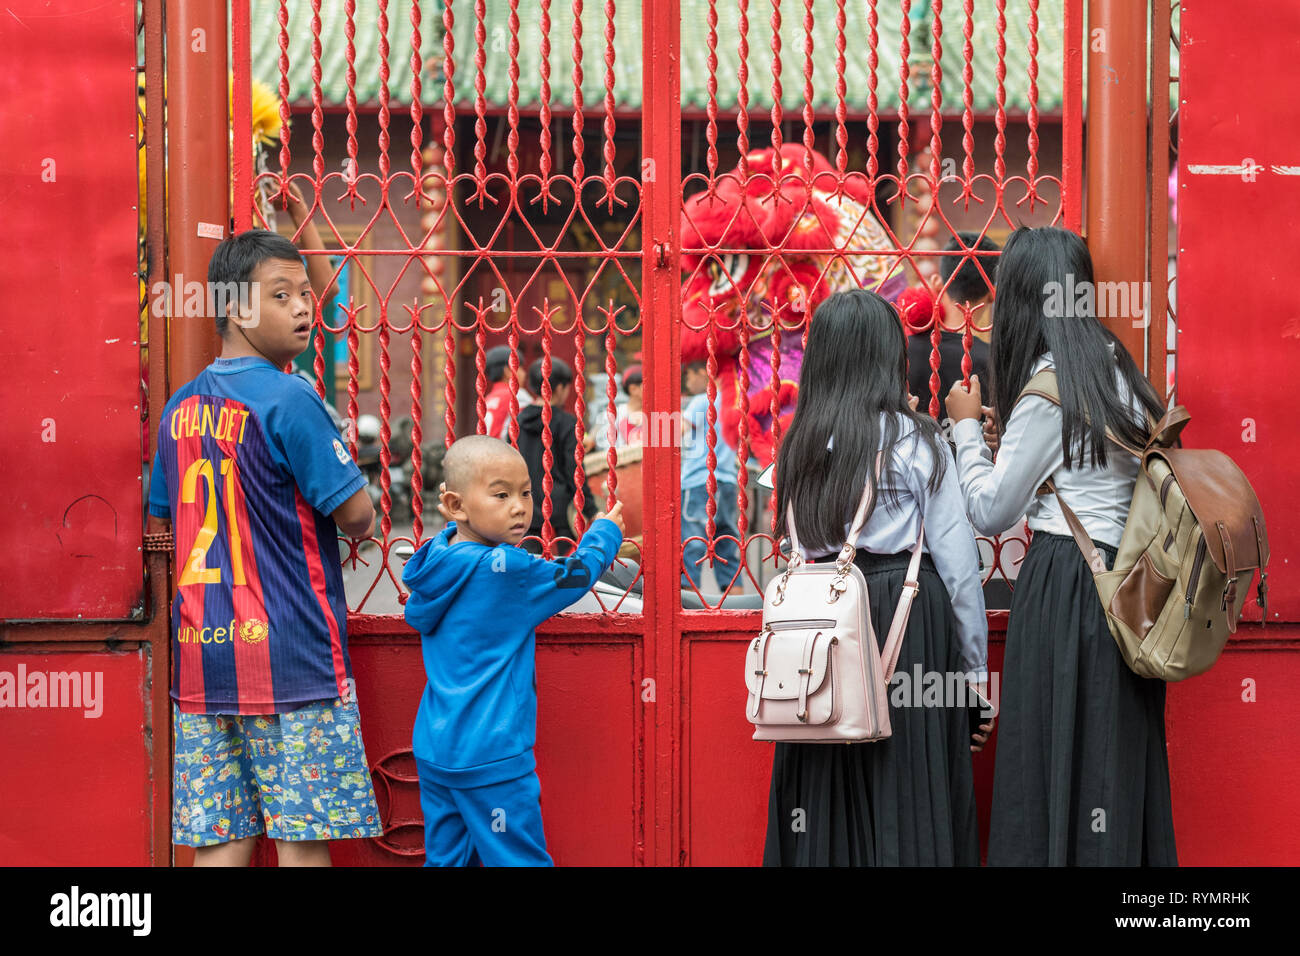 Children stand along a metal gate with forged bars painted red including a boy who has facial features of a person with Down syndrome - Phnom Penh. Stock Photo